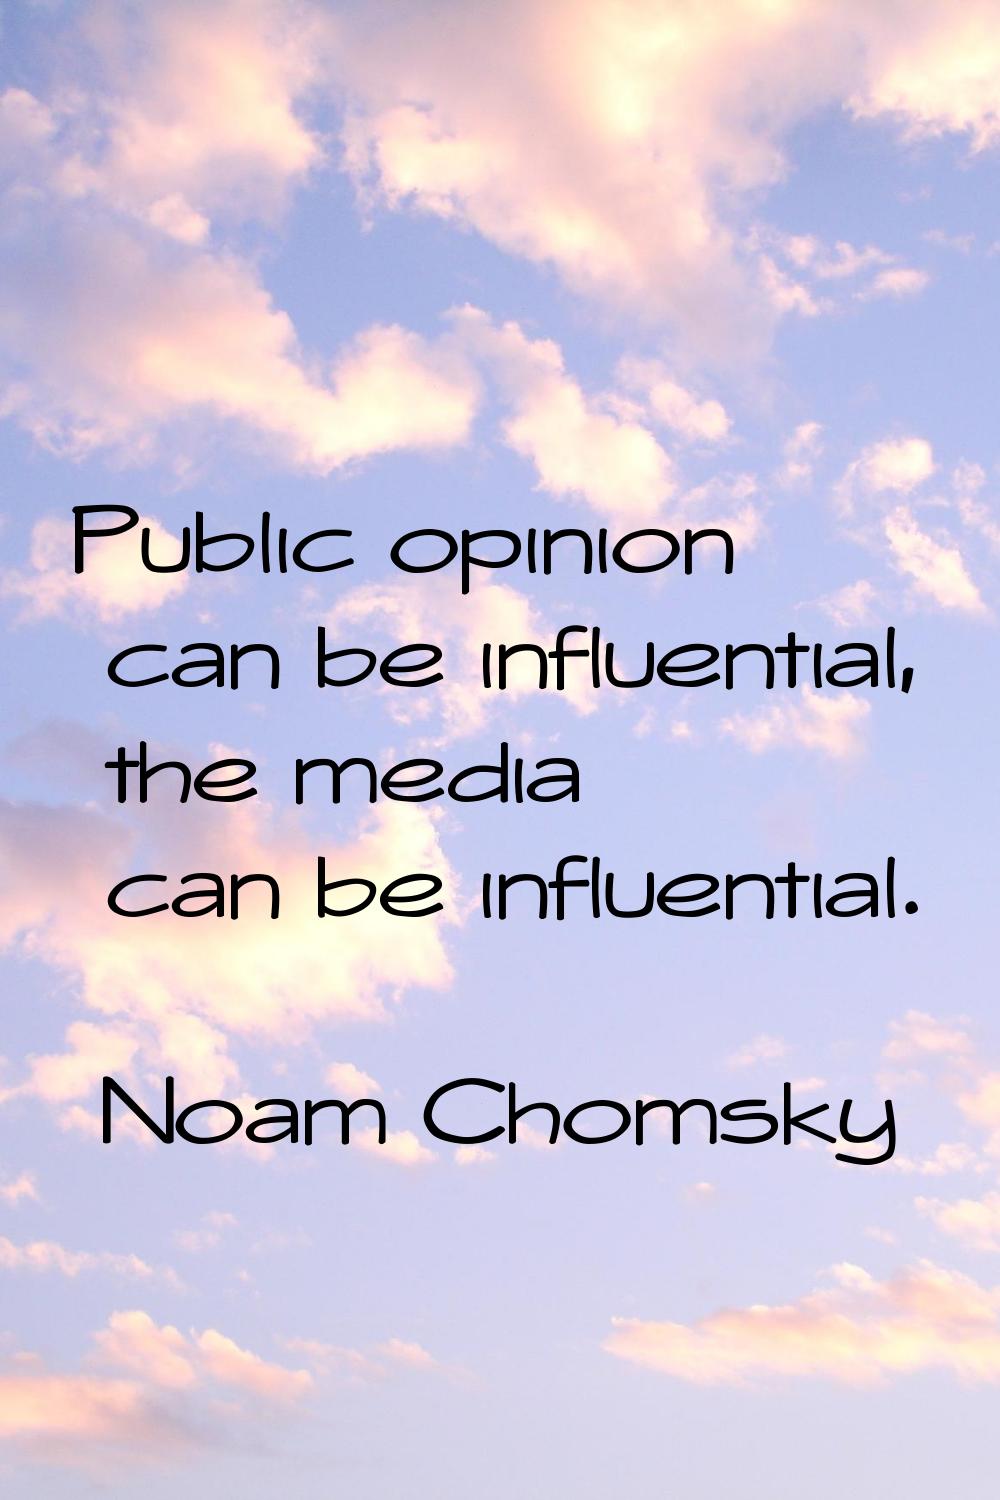 Public opinion can be influential, the media can be influential.